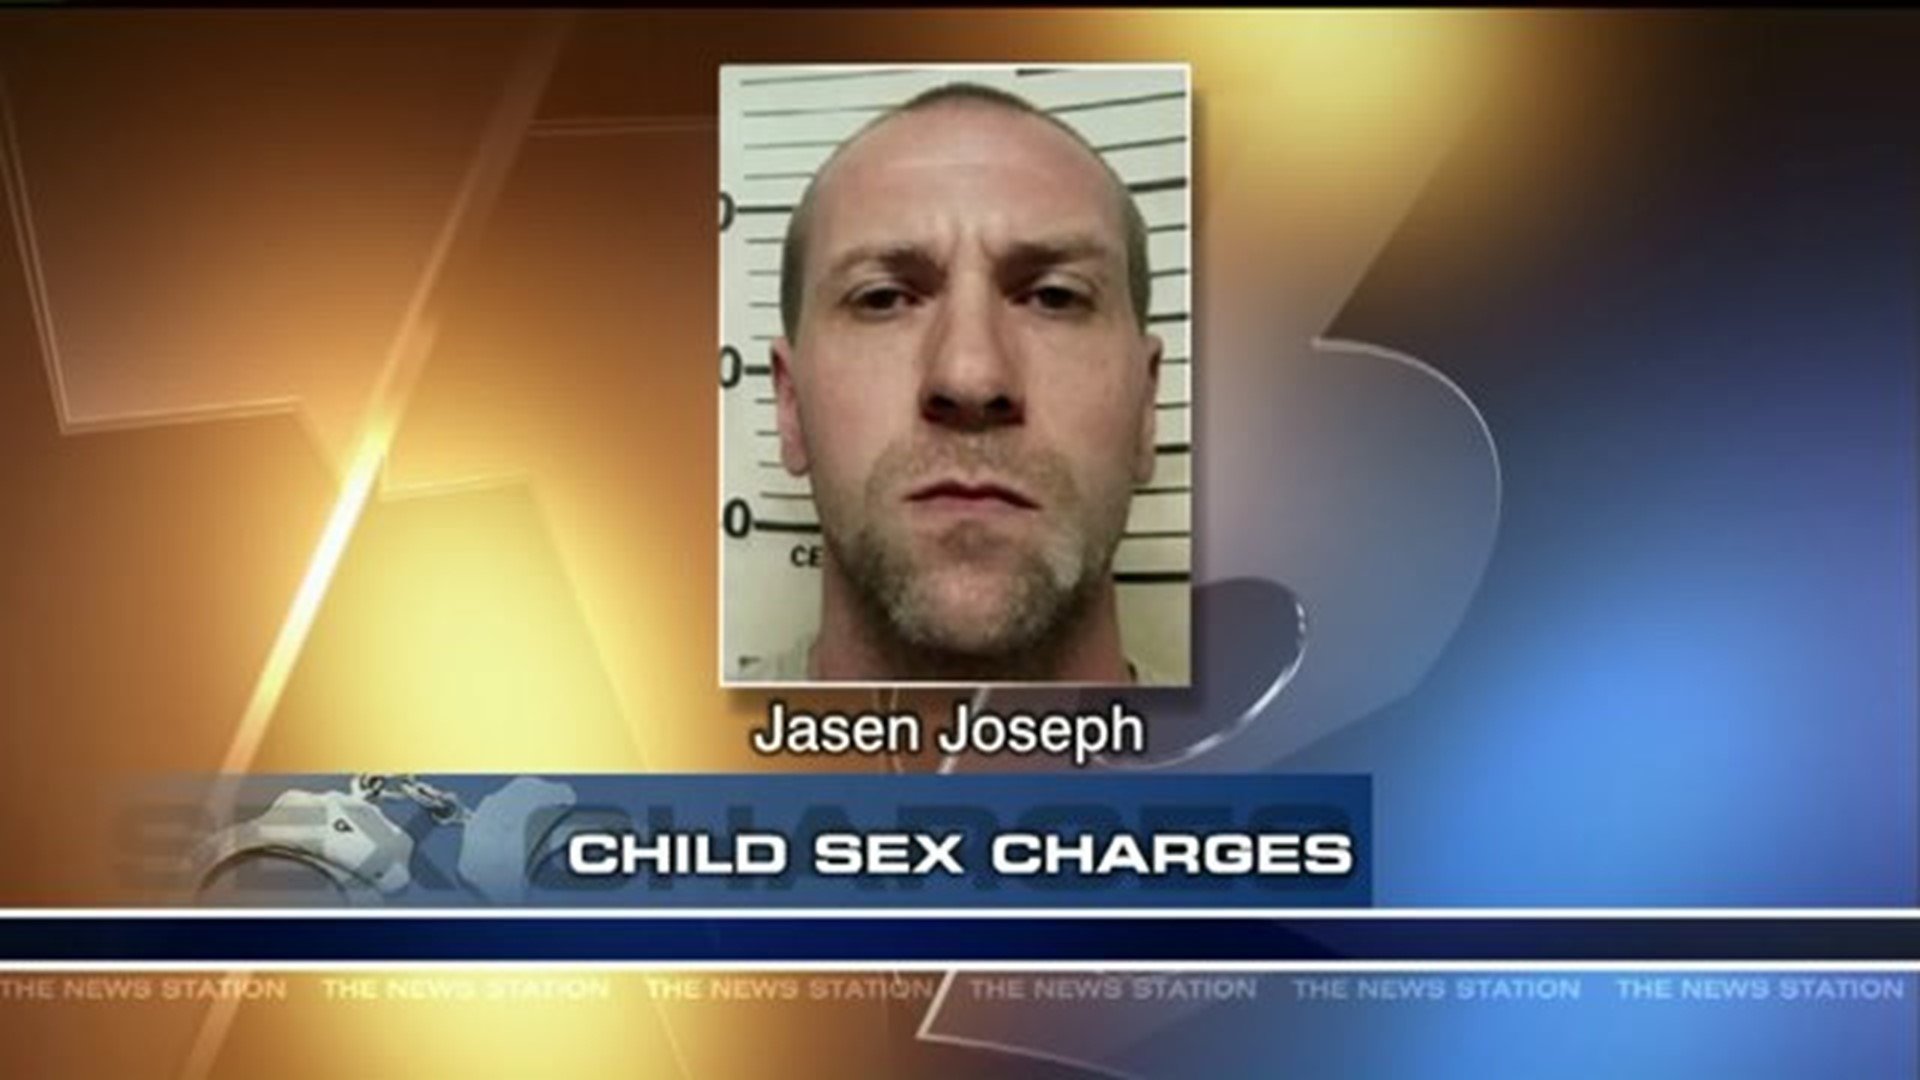 Forced Porn - Police: Schuylkill County Man Forced Child to Watch Porn | wnep.com